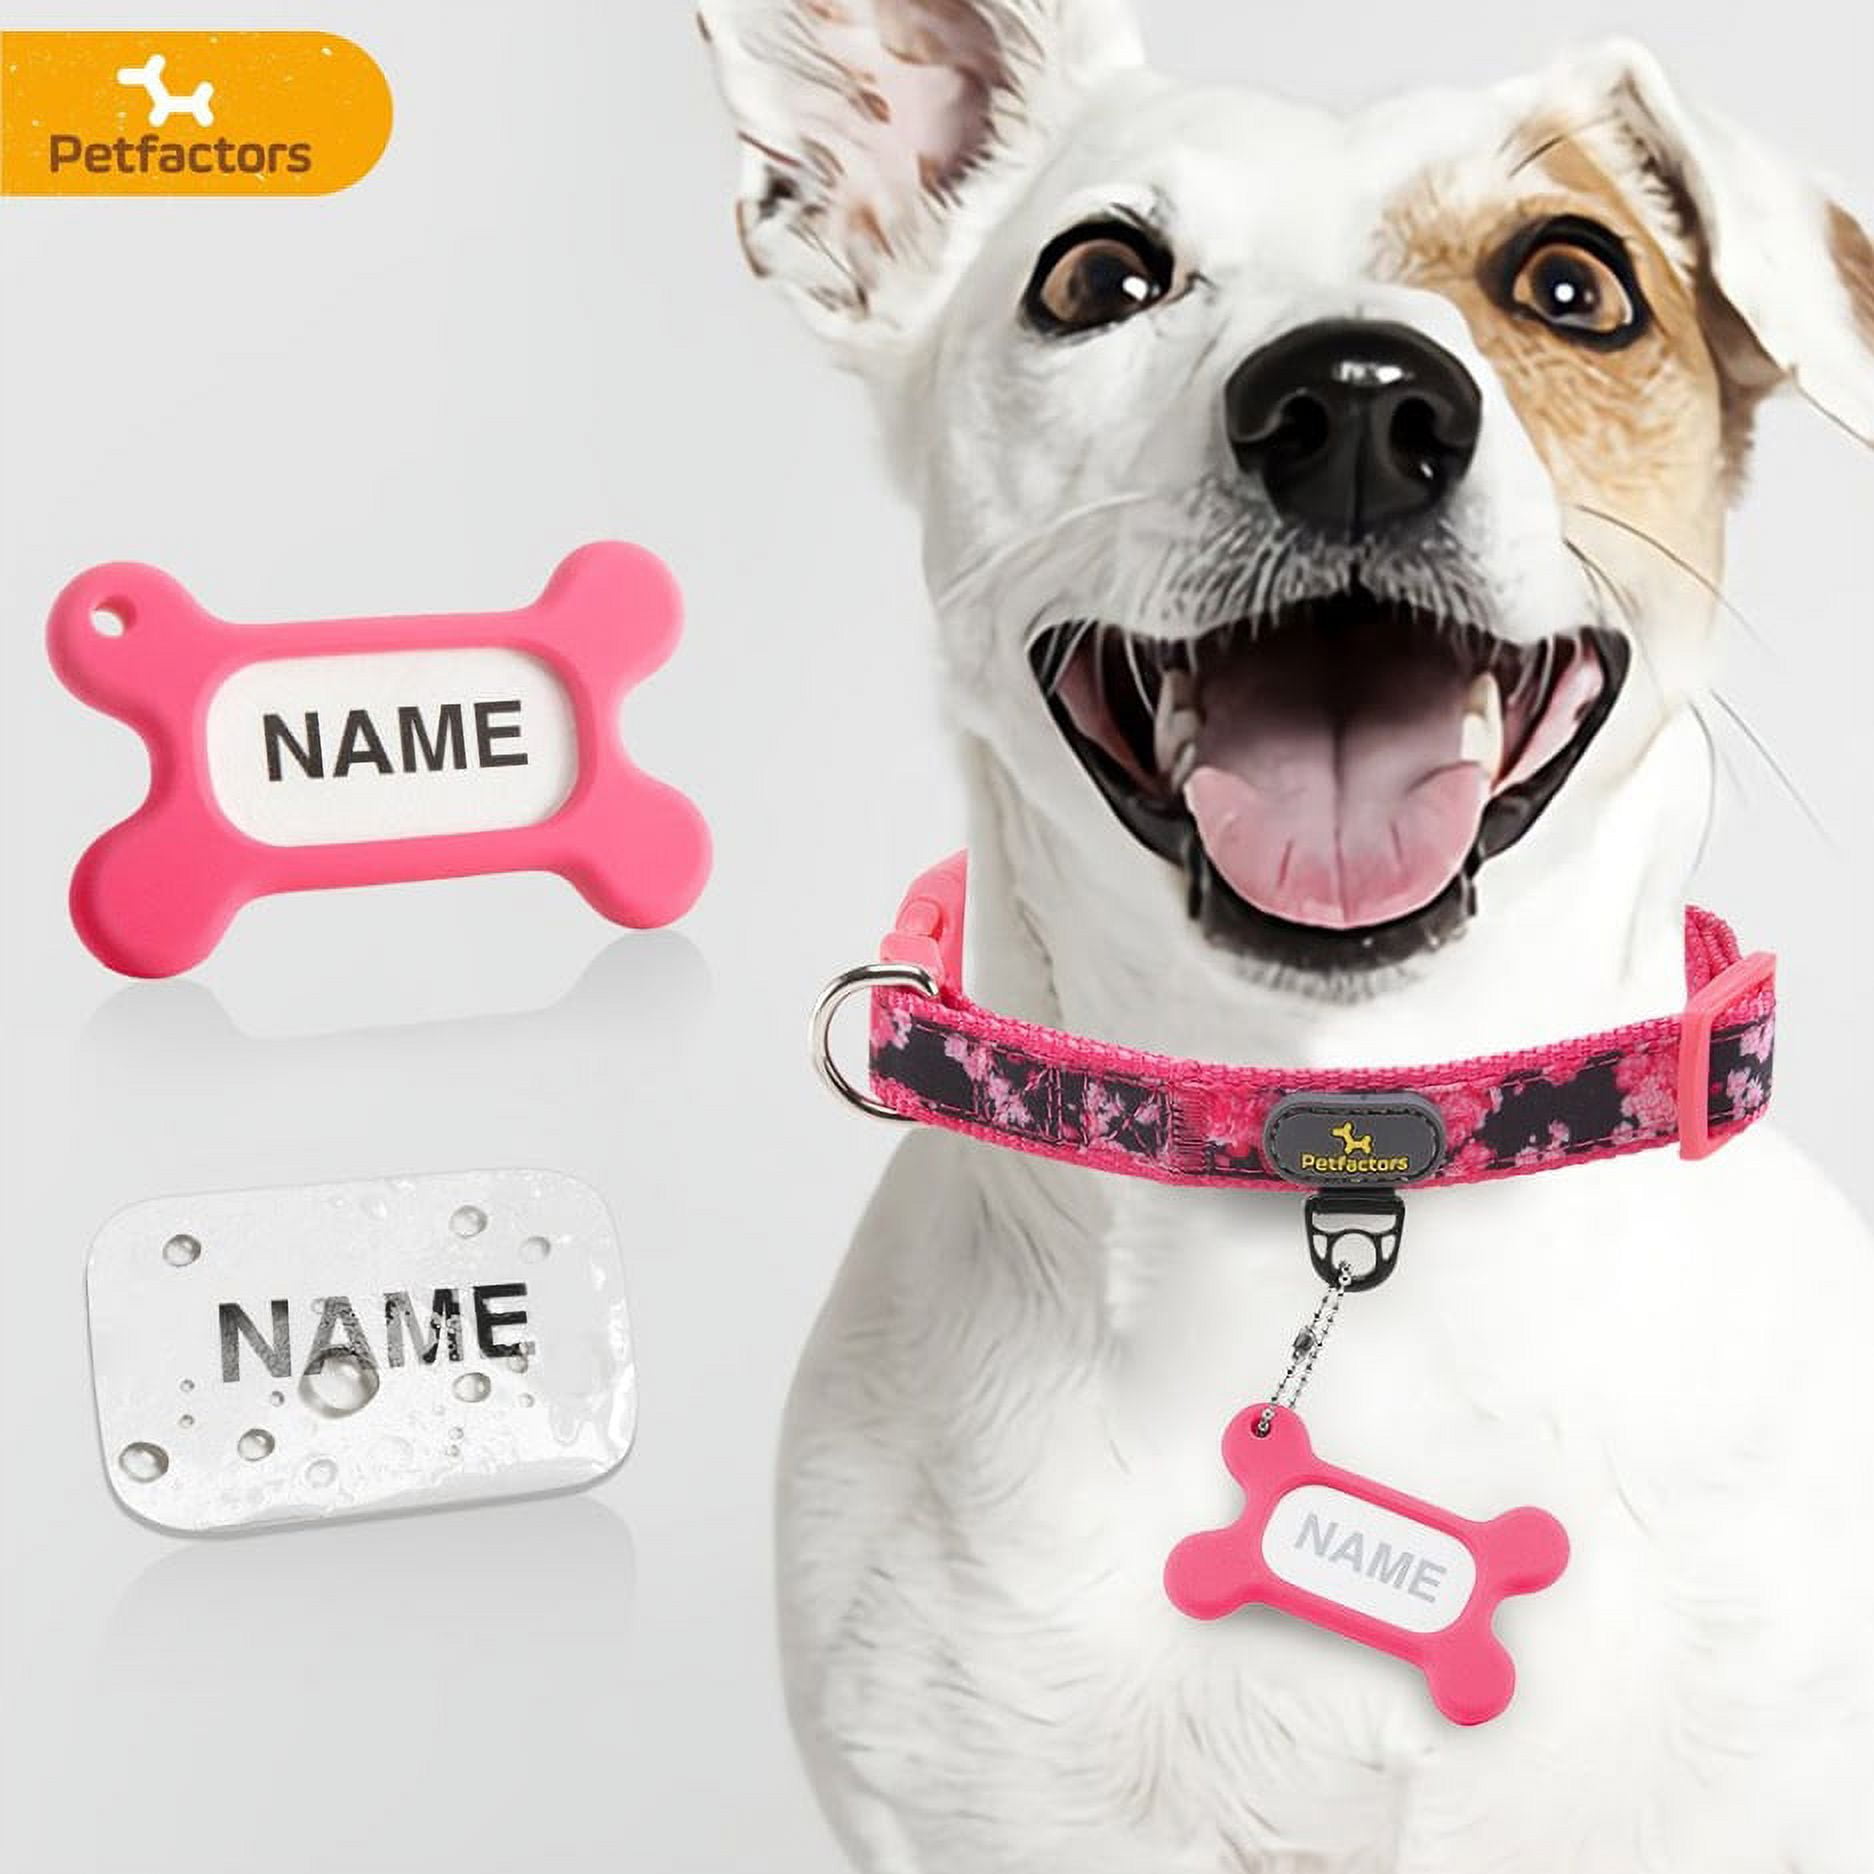 Petfactors Adjustable Dog Collar with Personalized Tags, Custom Pets Collar DIY Name & Phone Number with Superior Material Durable & Comfy 10 Patterns